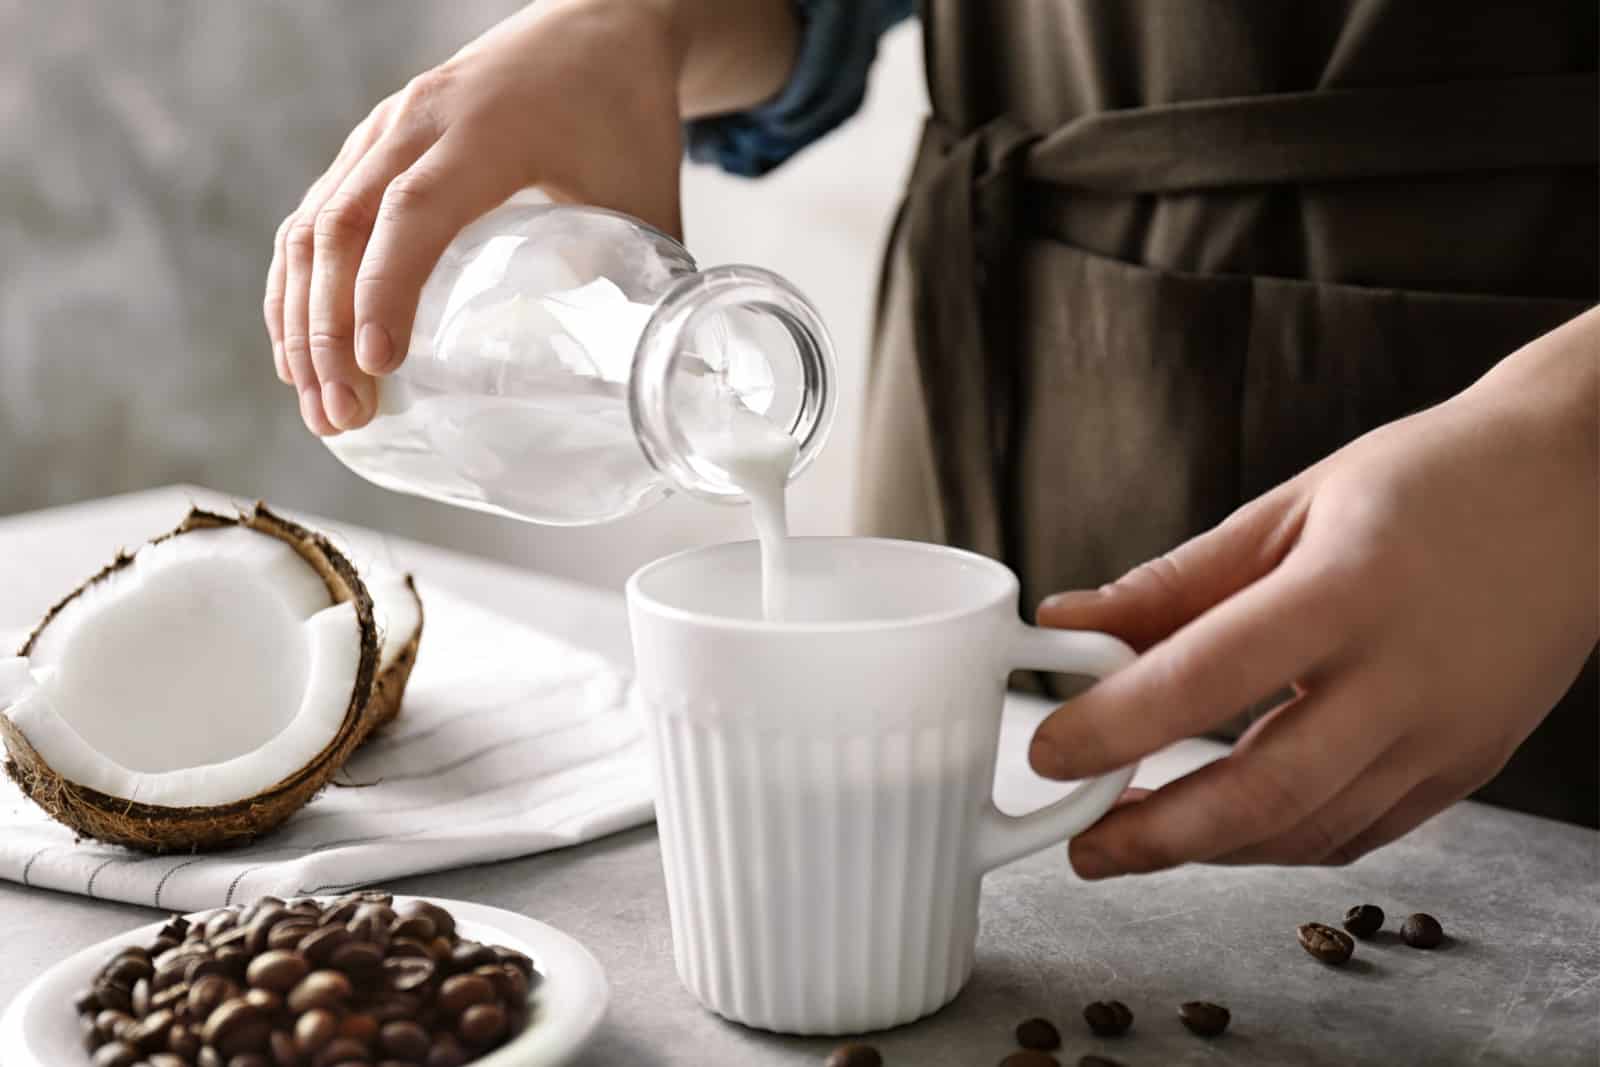 Woman pouring coconut milk into cup of coffee on table